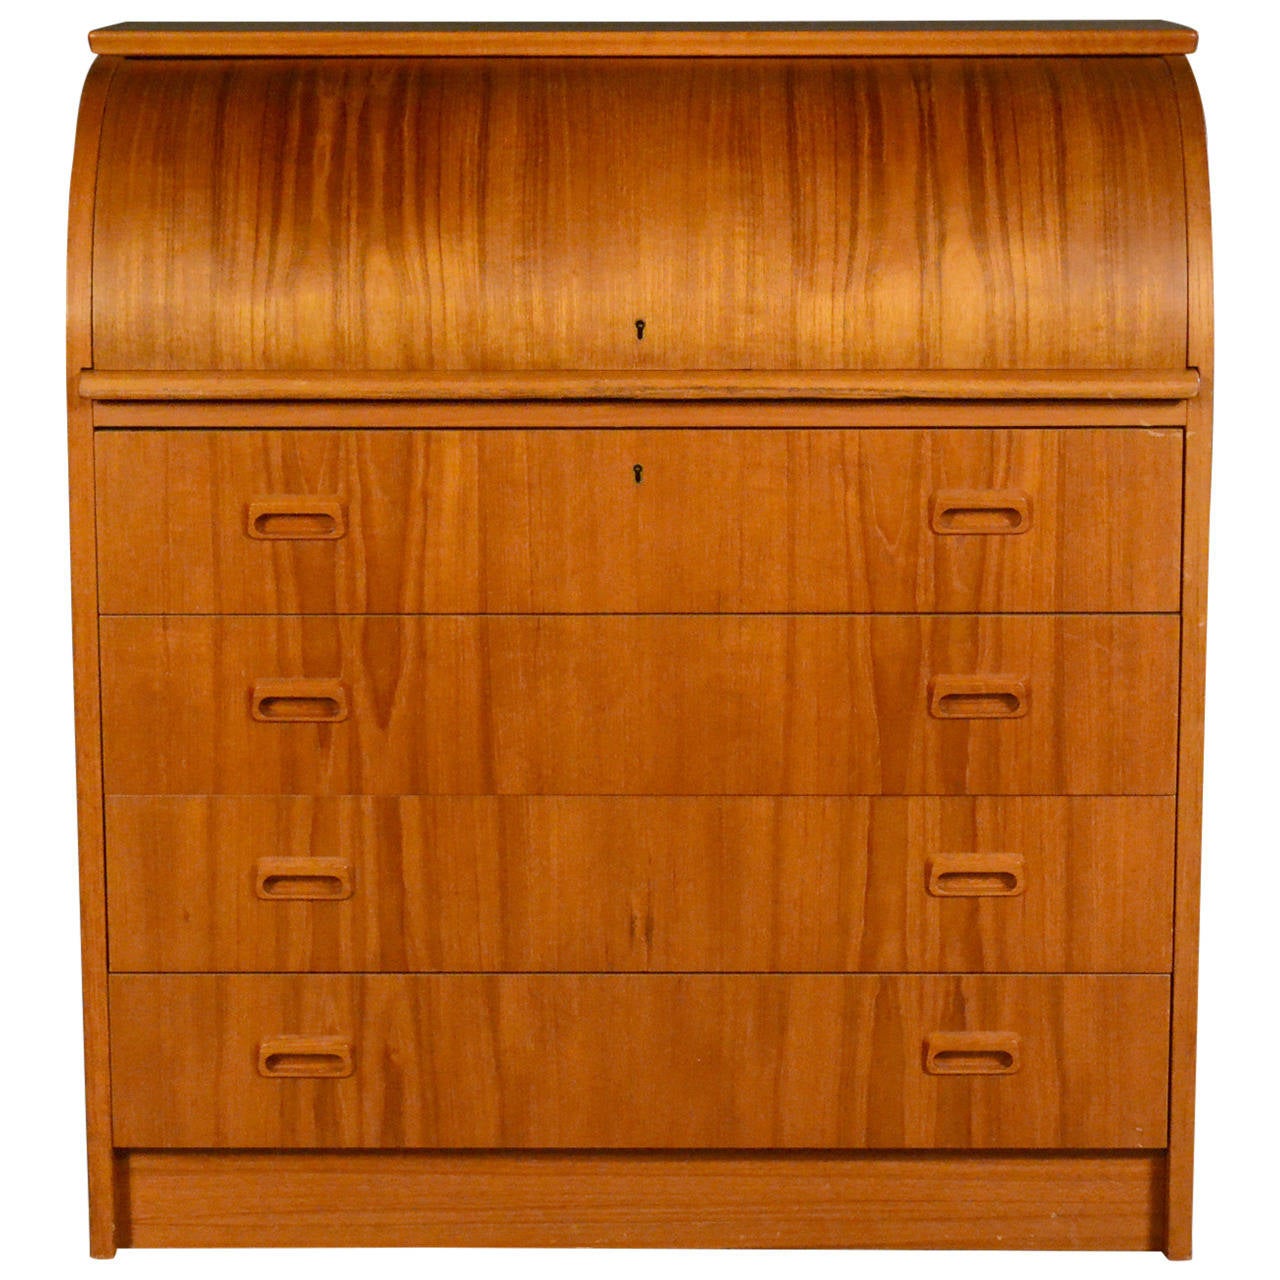 Danish Teak Rolltop Desk With Four Drawers For Sale At 1stdibs